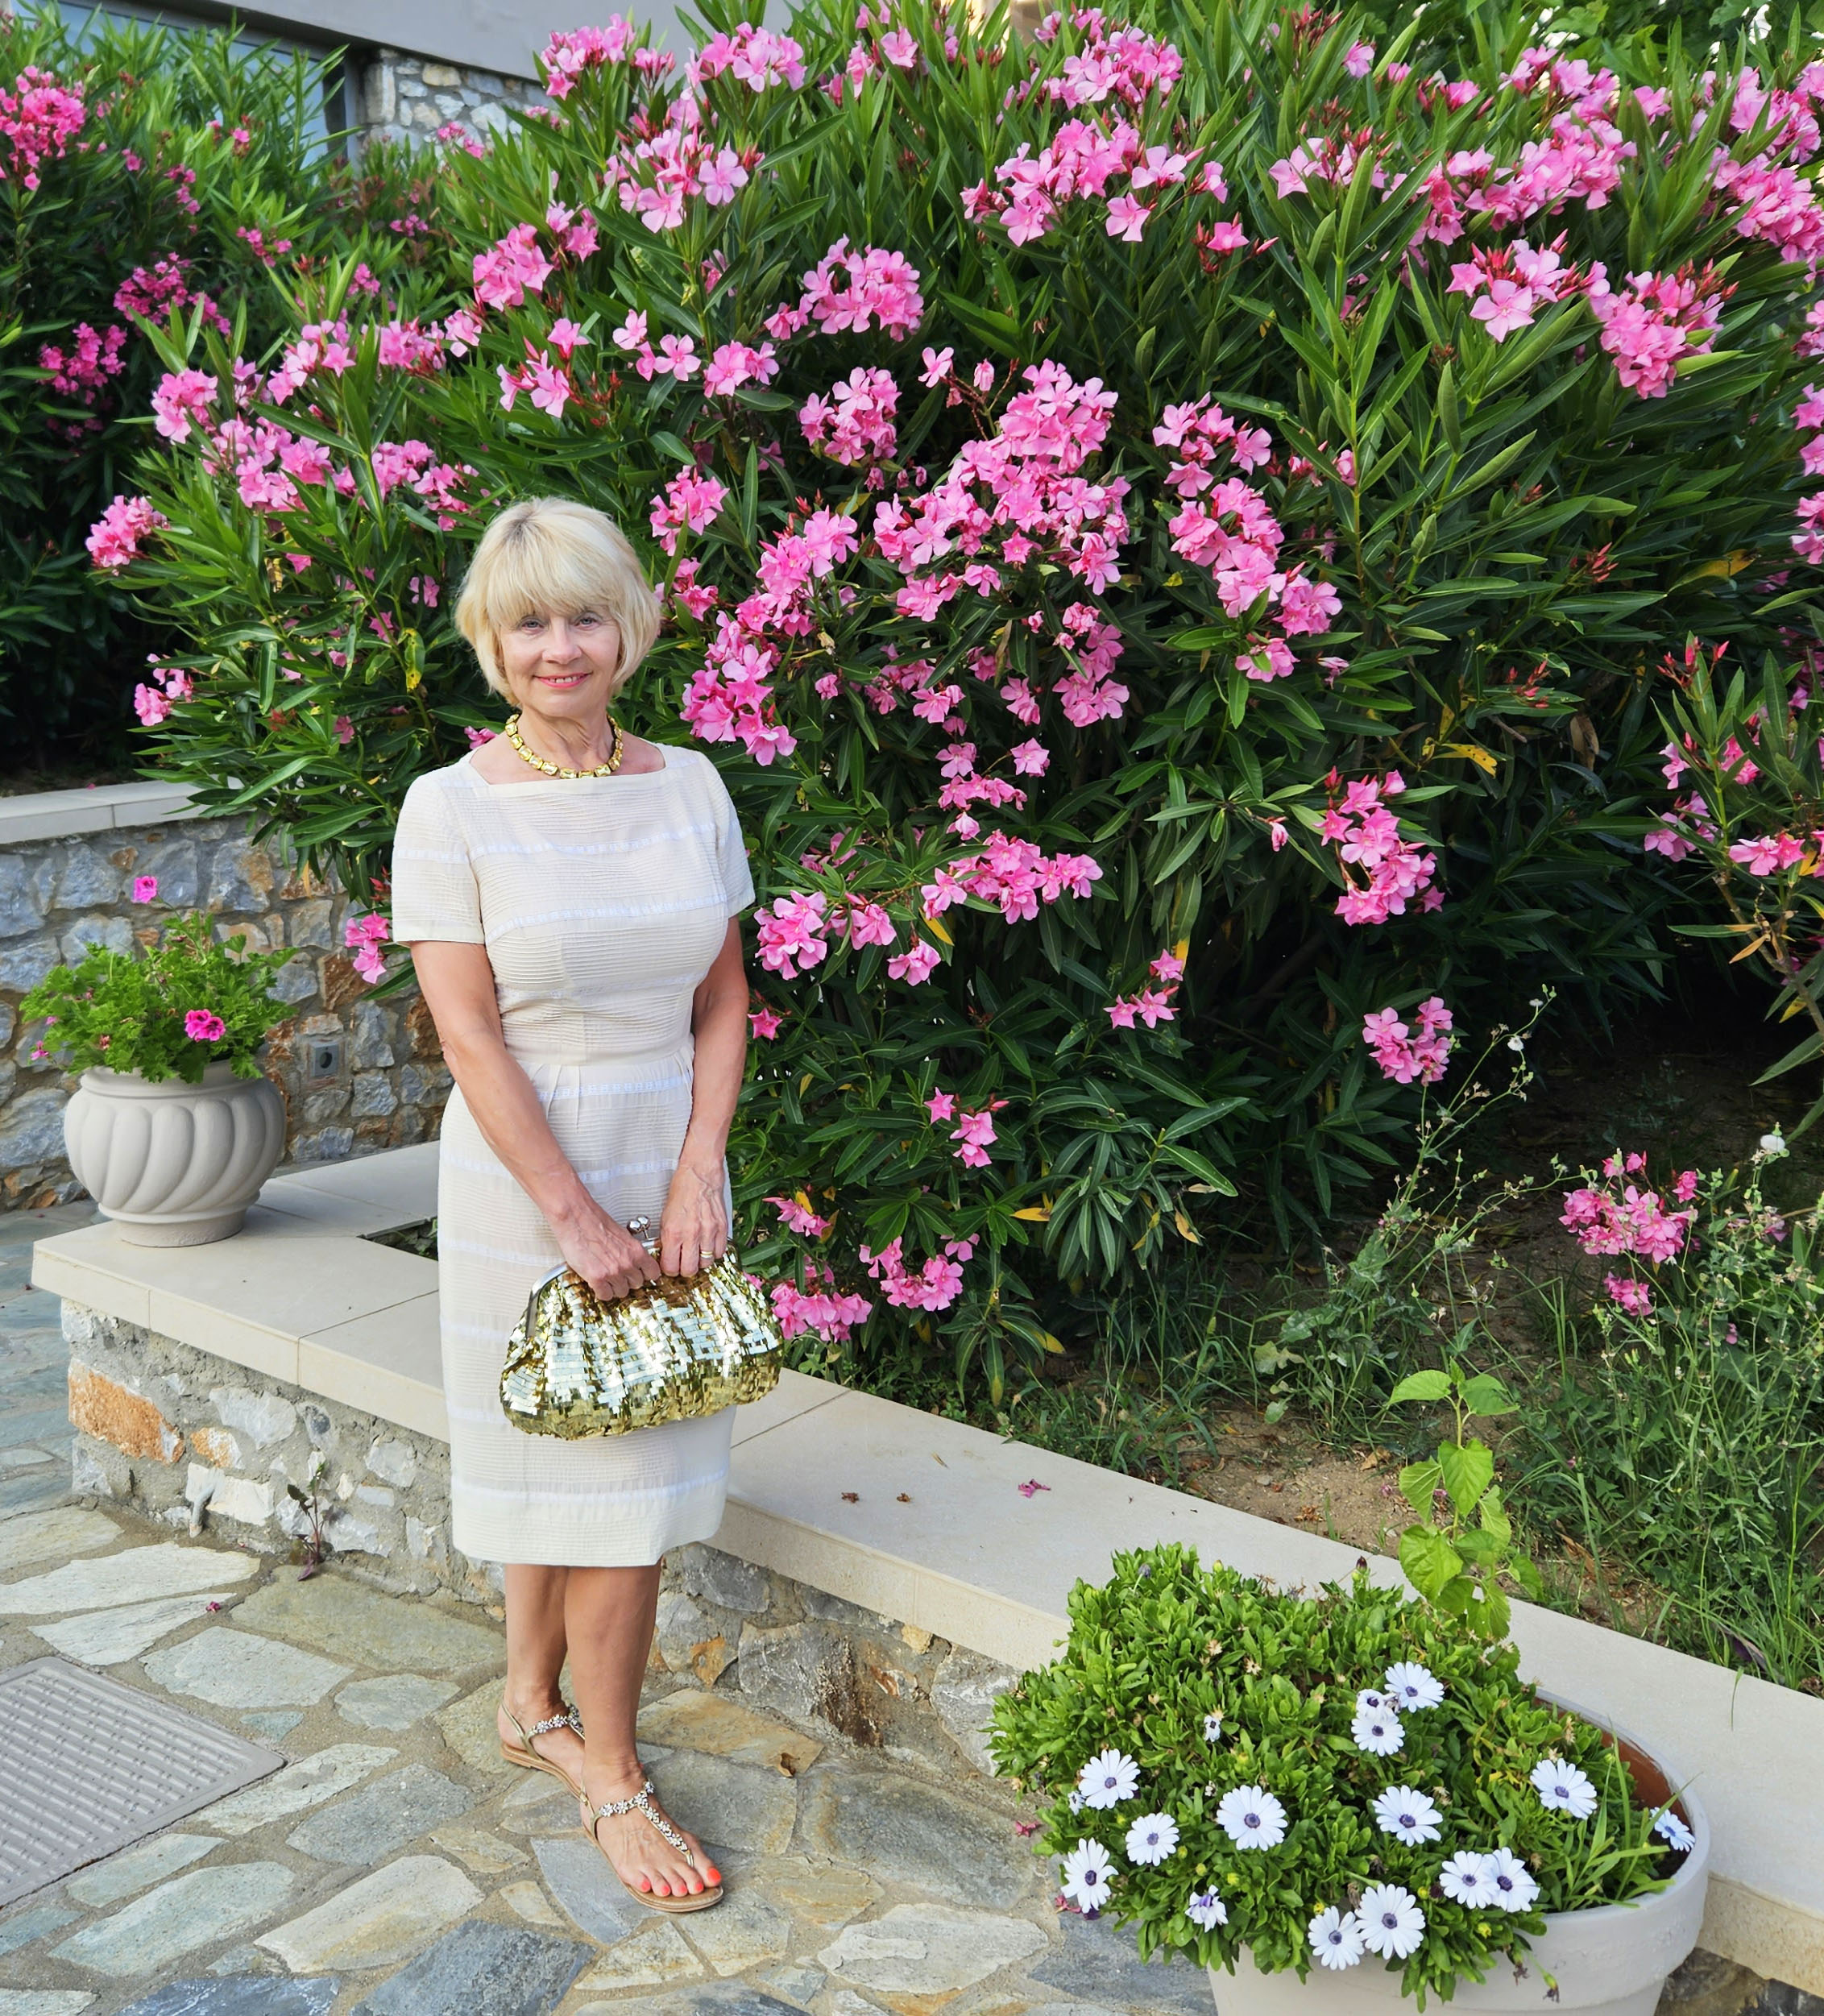 Gail Hanlon on holiday in Greece wearing a cream cotton dress and backed by bougainvillea